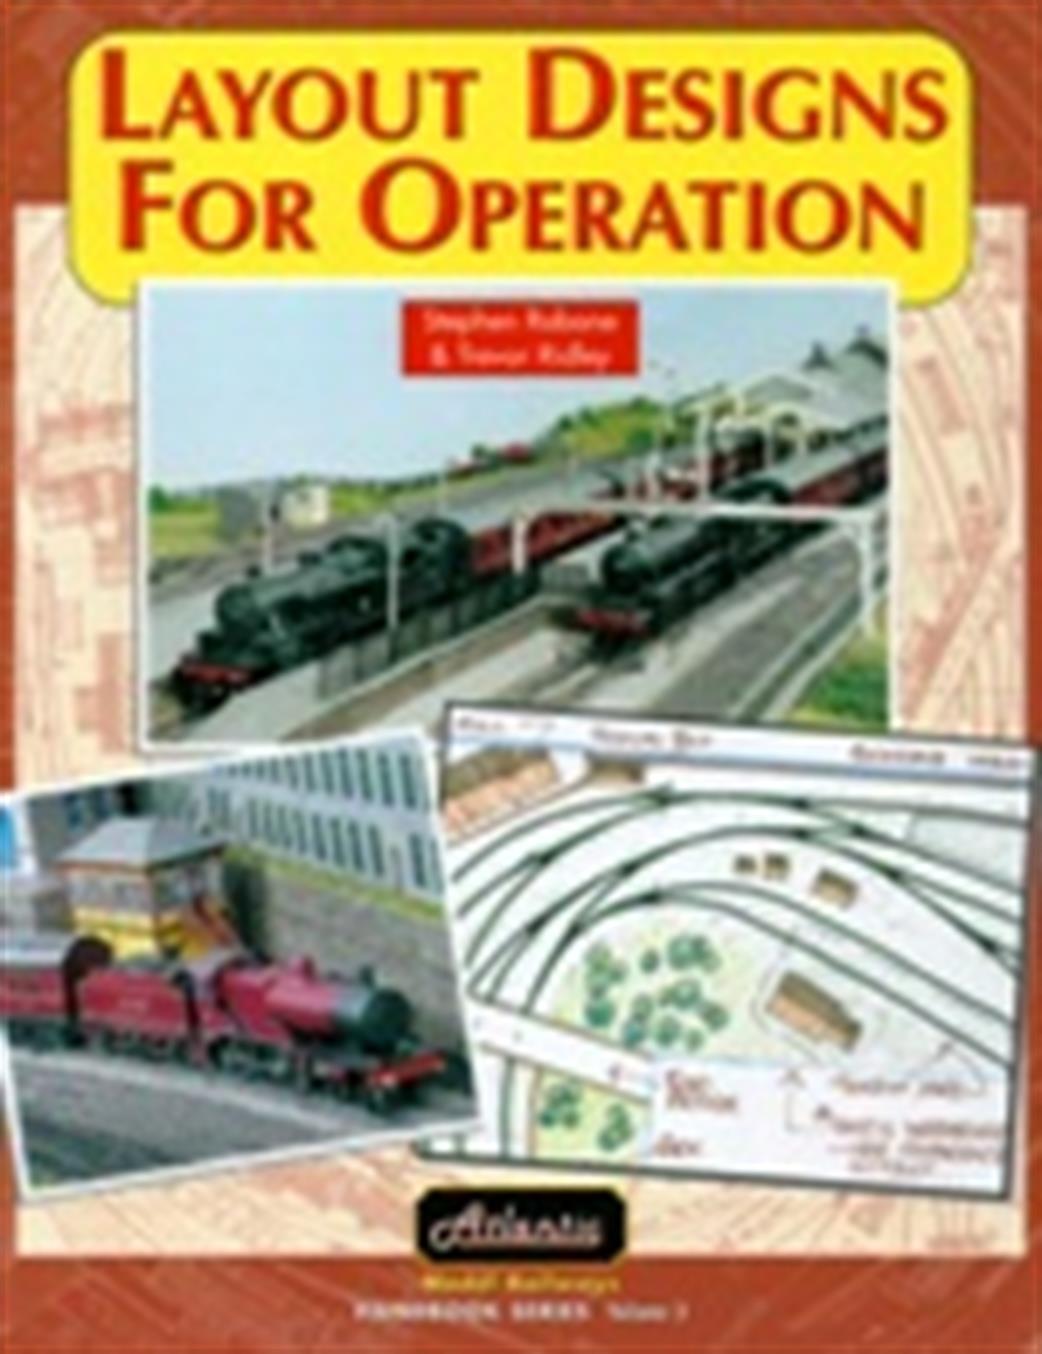 9781902827148 Layout Designs for Operation by Stephen Rabone & Trevor Ridley